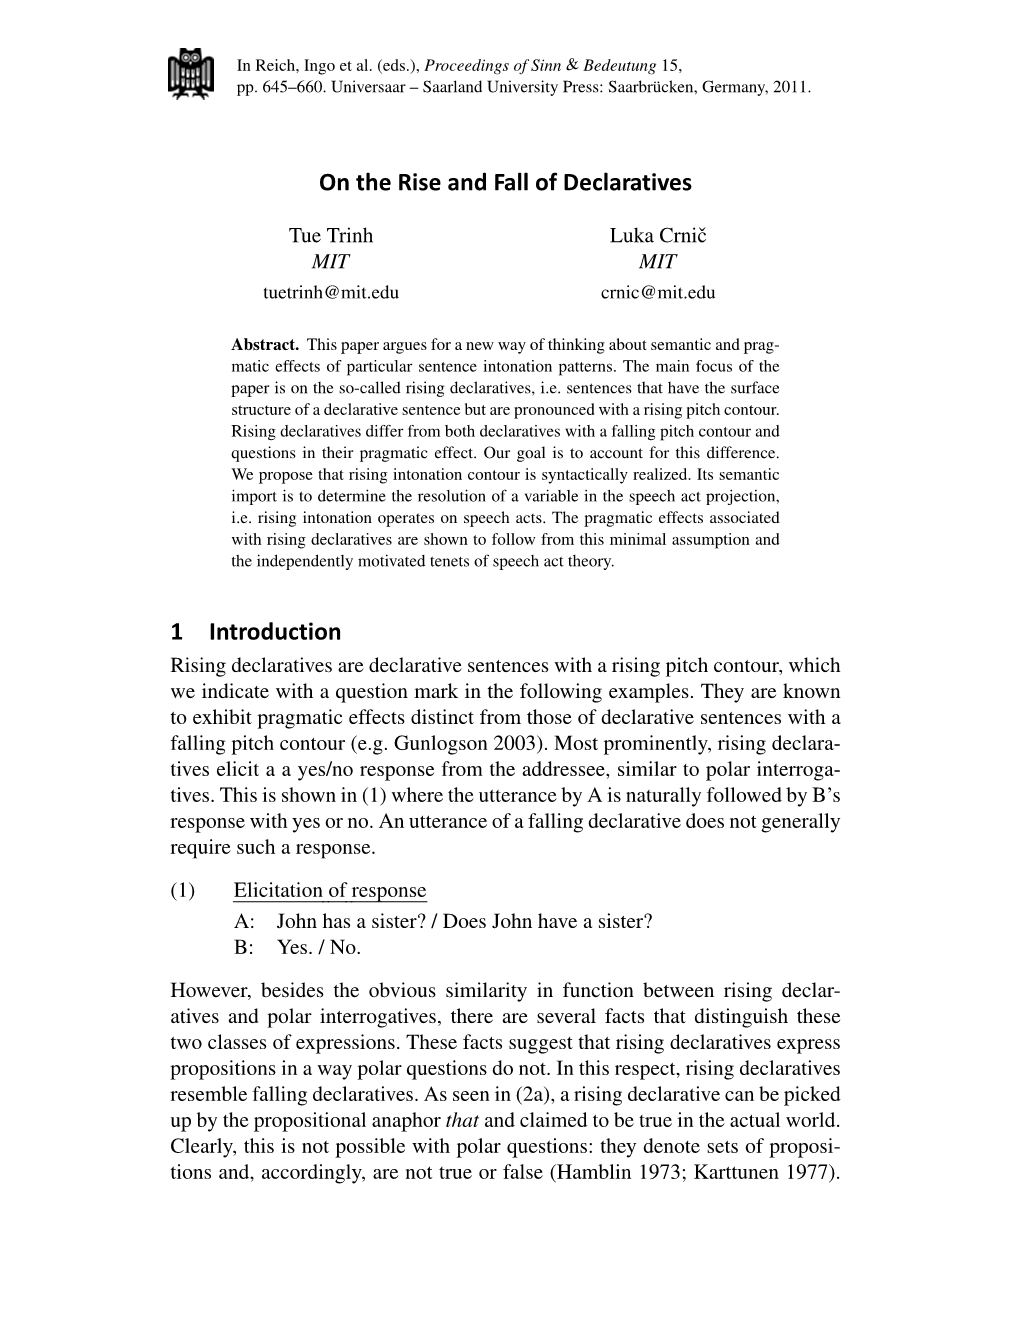 On the Rise and Fall of Declaratives 1 Introduction